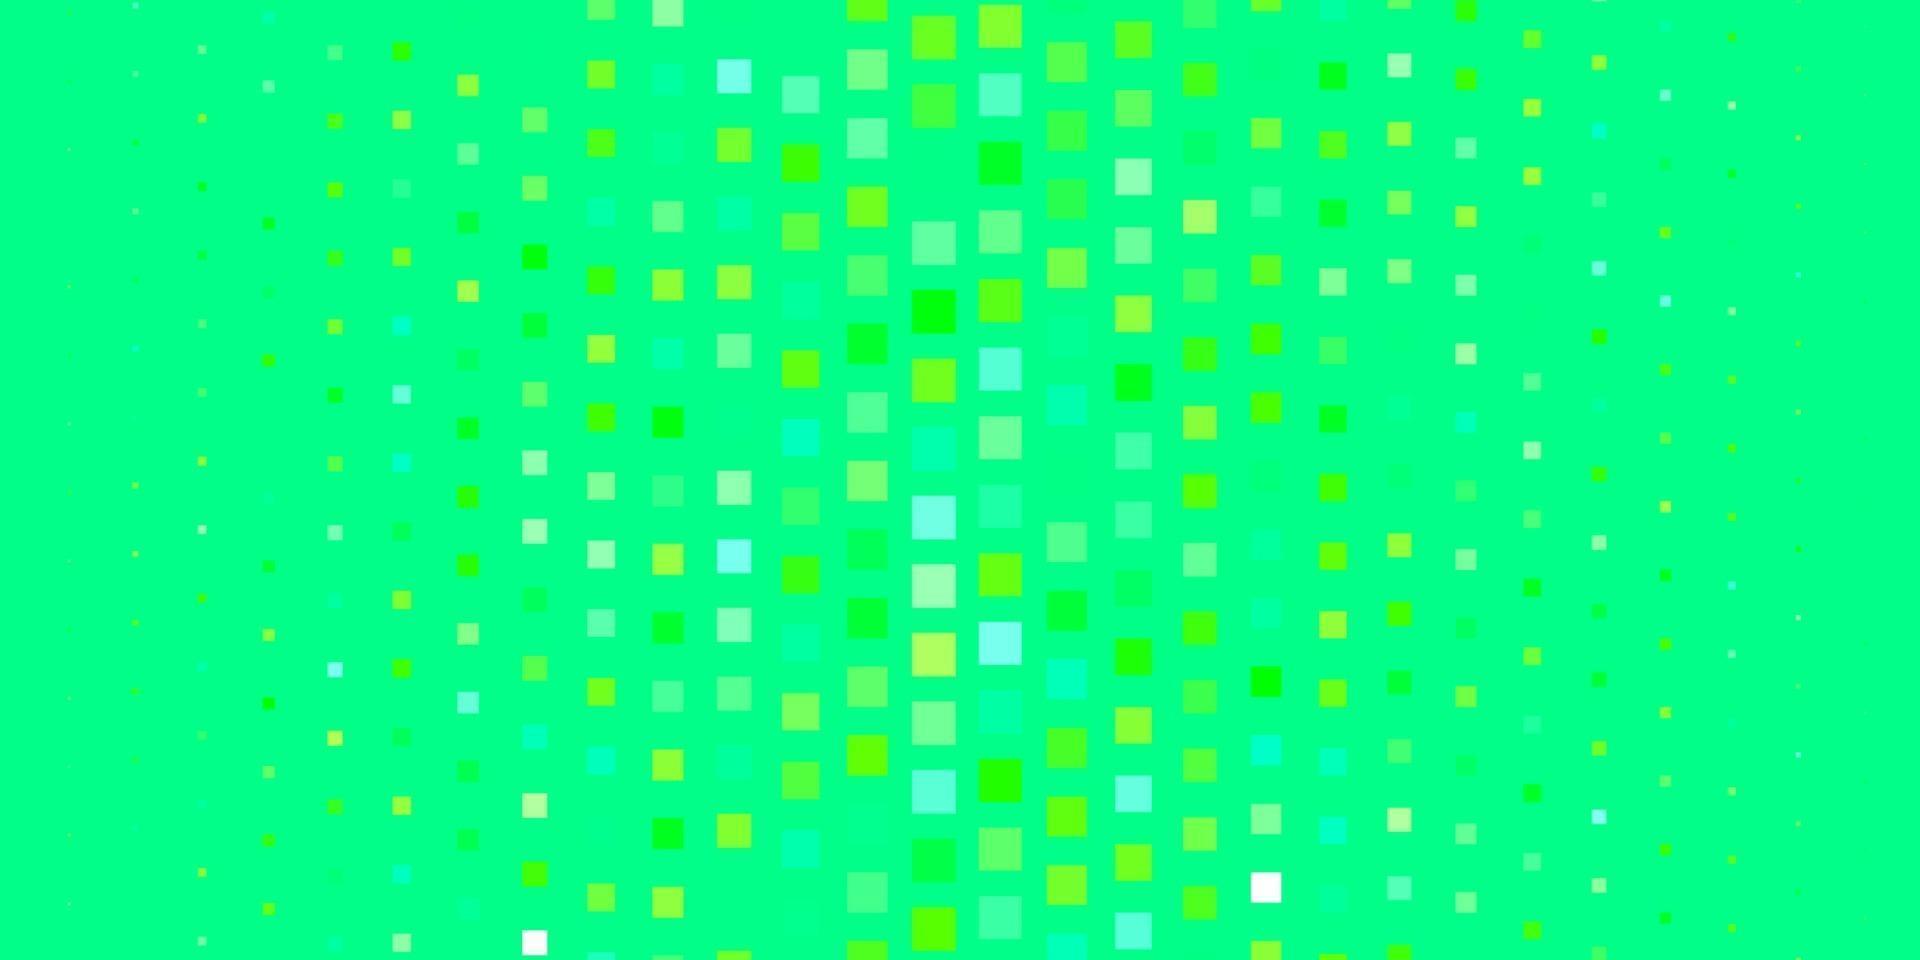 Light Green vector backdrop with rectangles.